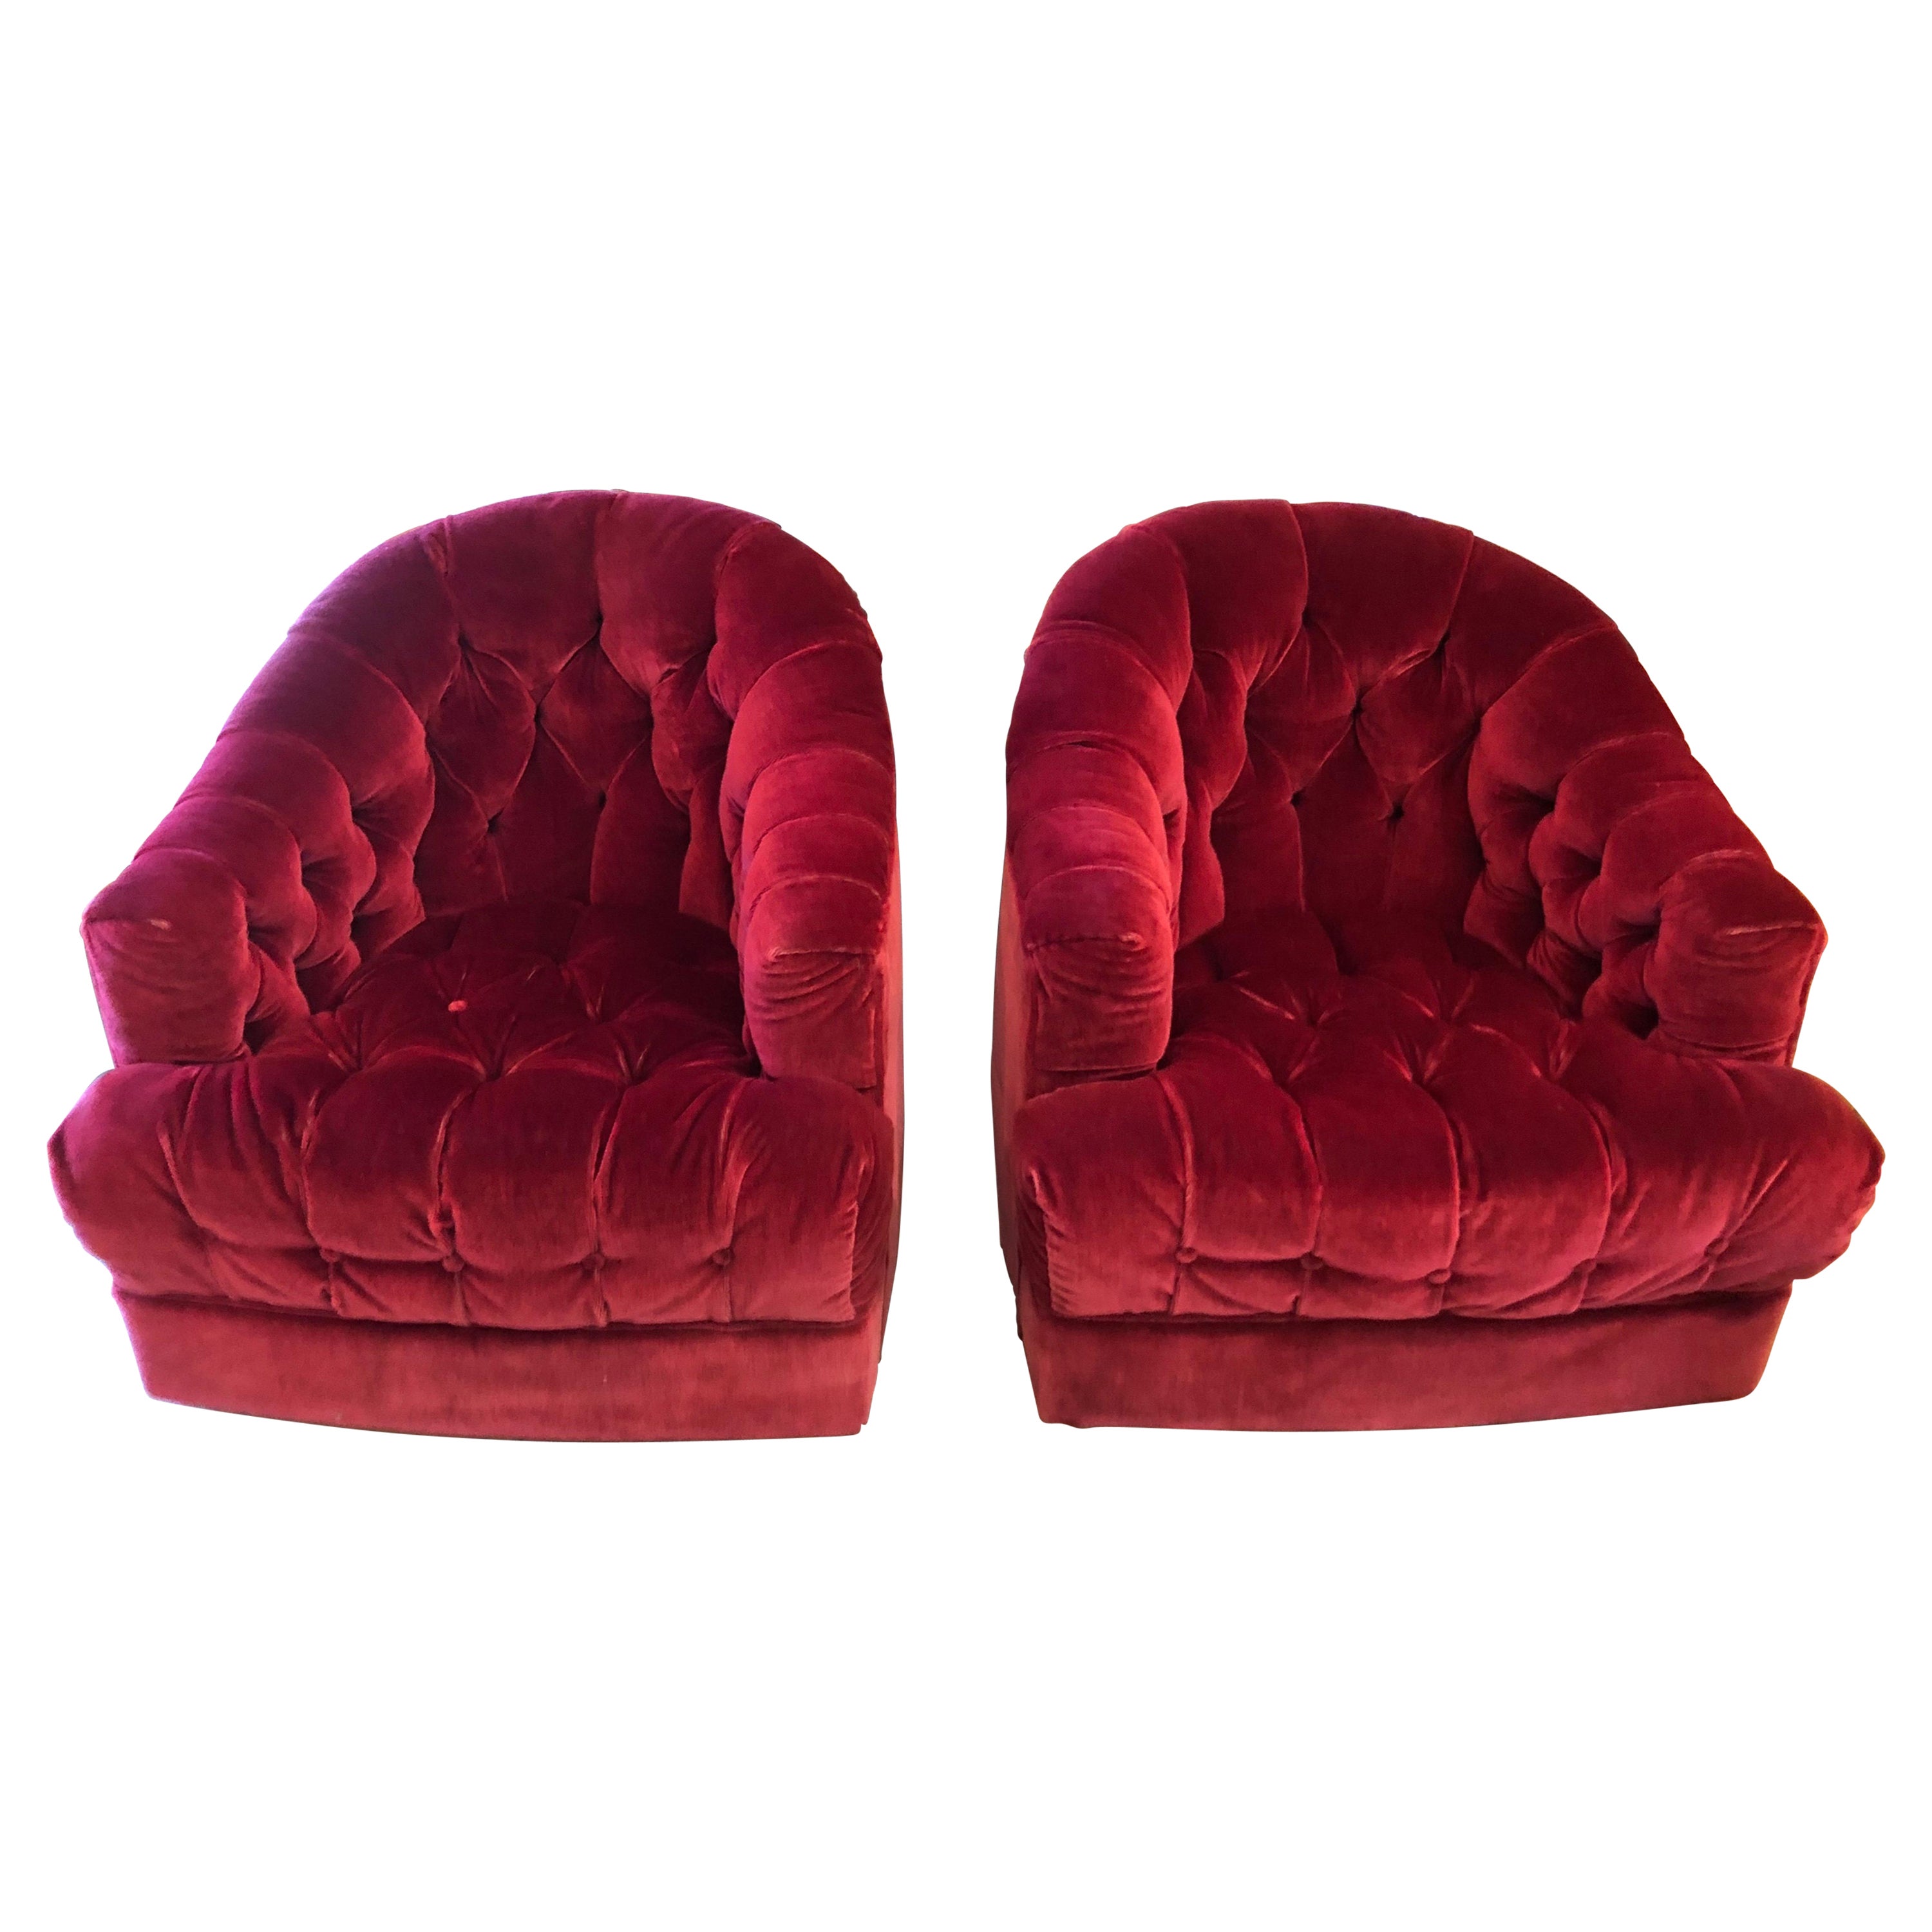 Pair of Raspberry Mohair Swivel Chairs by Directional